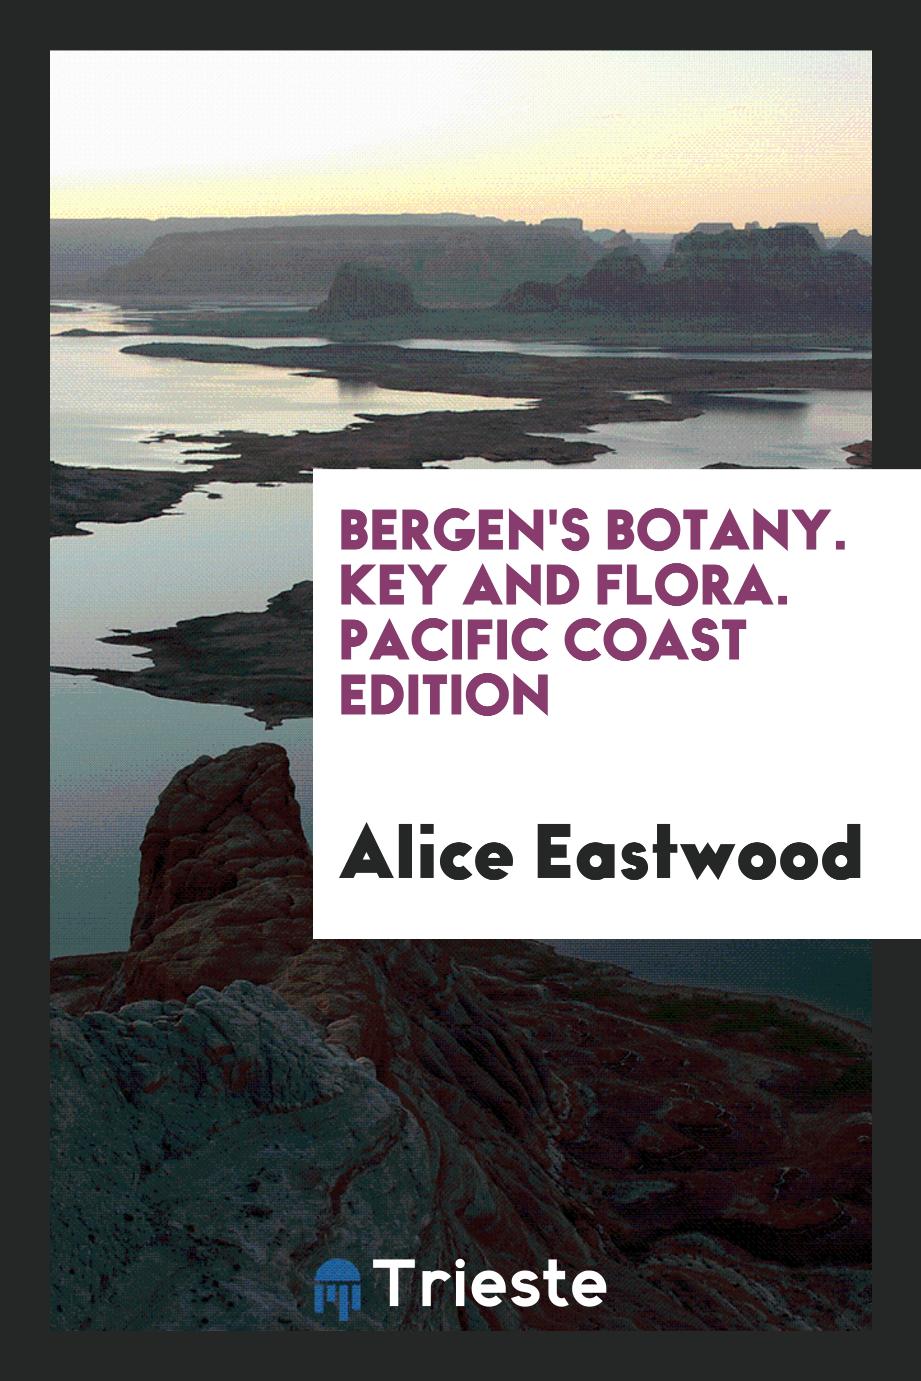 Bergen's Botany. Key and Flora. Pacific Coast Edition